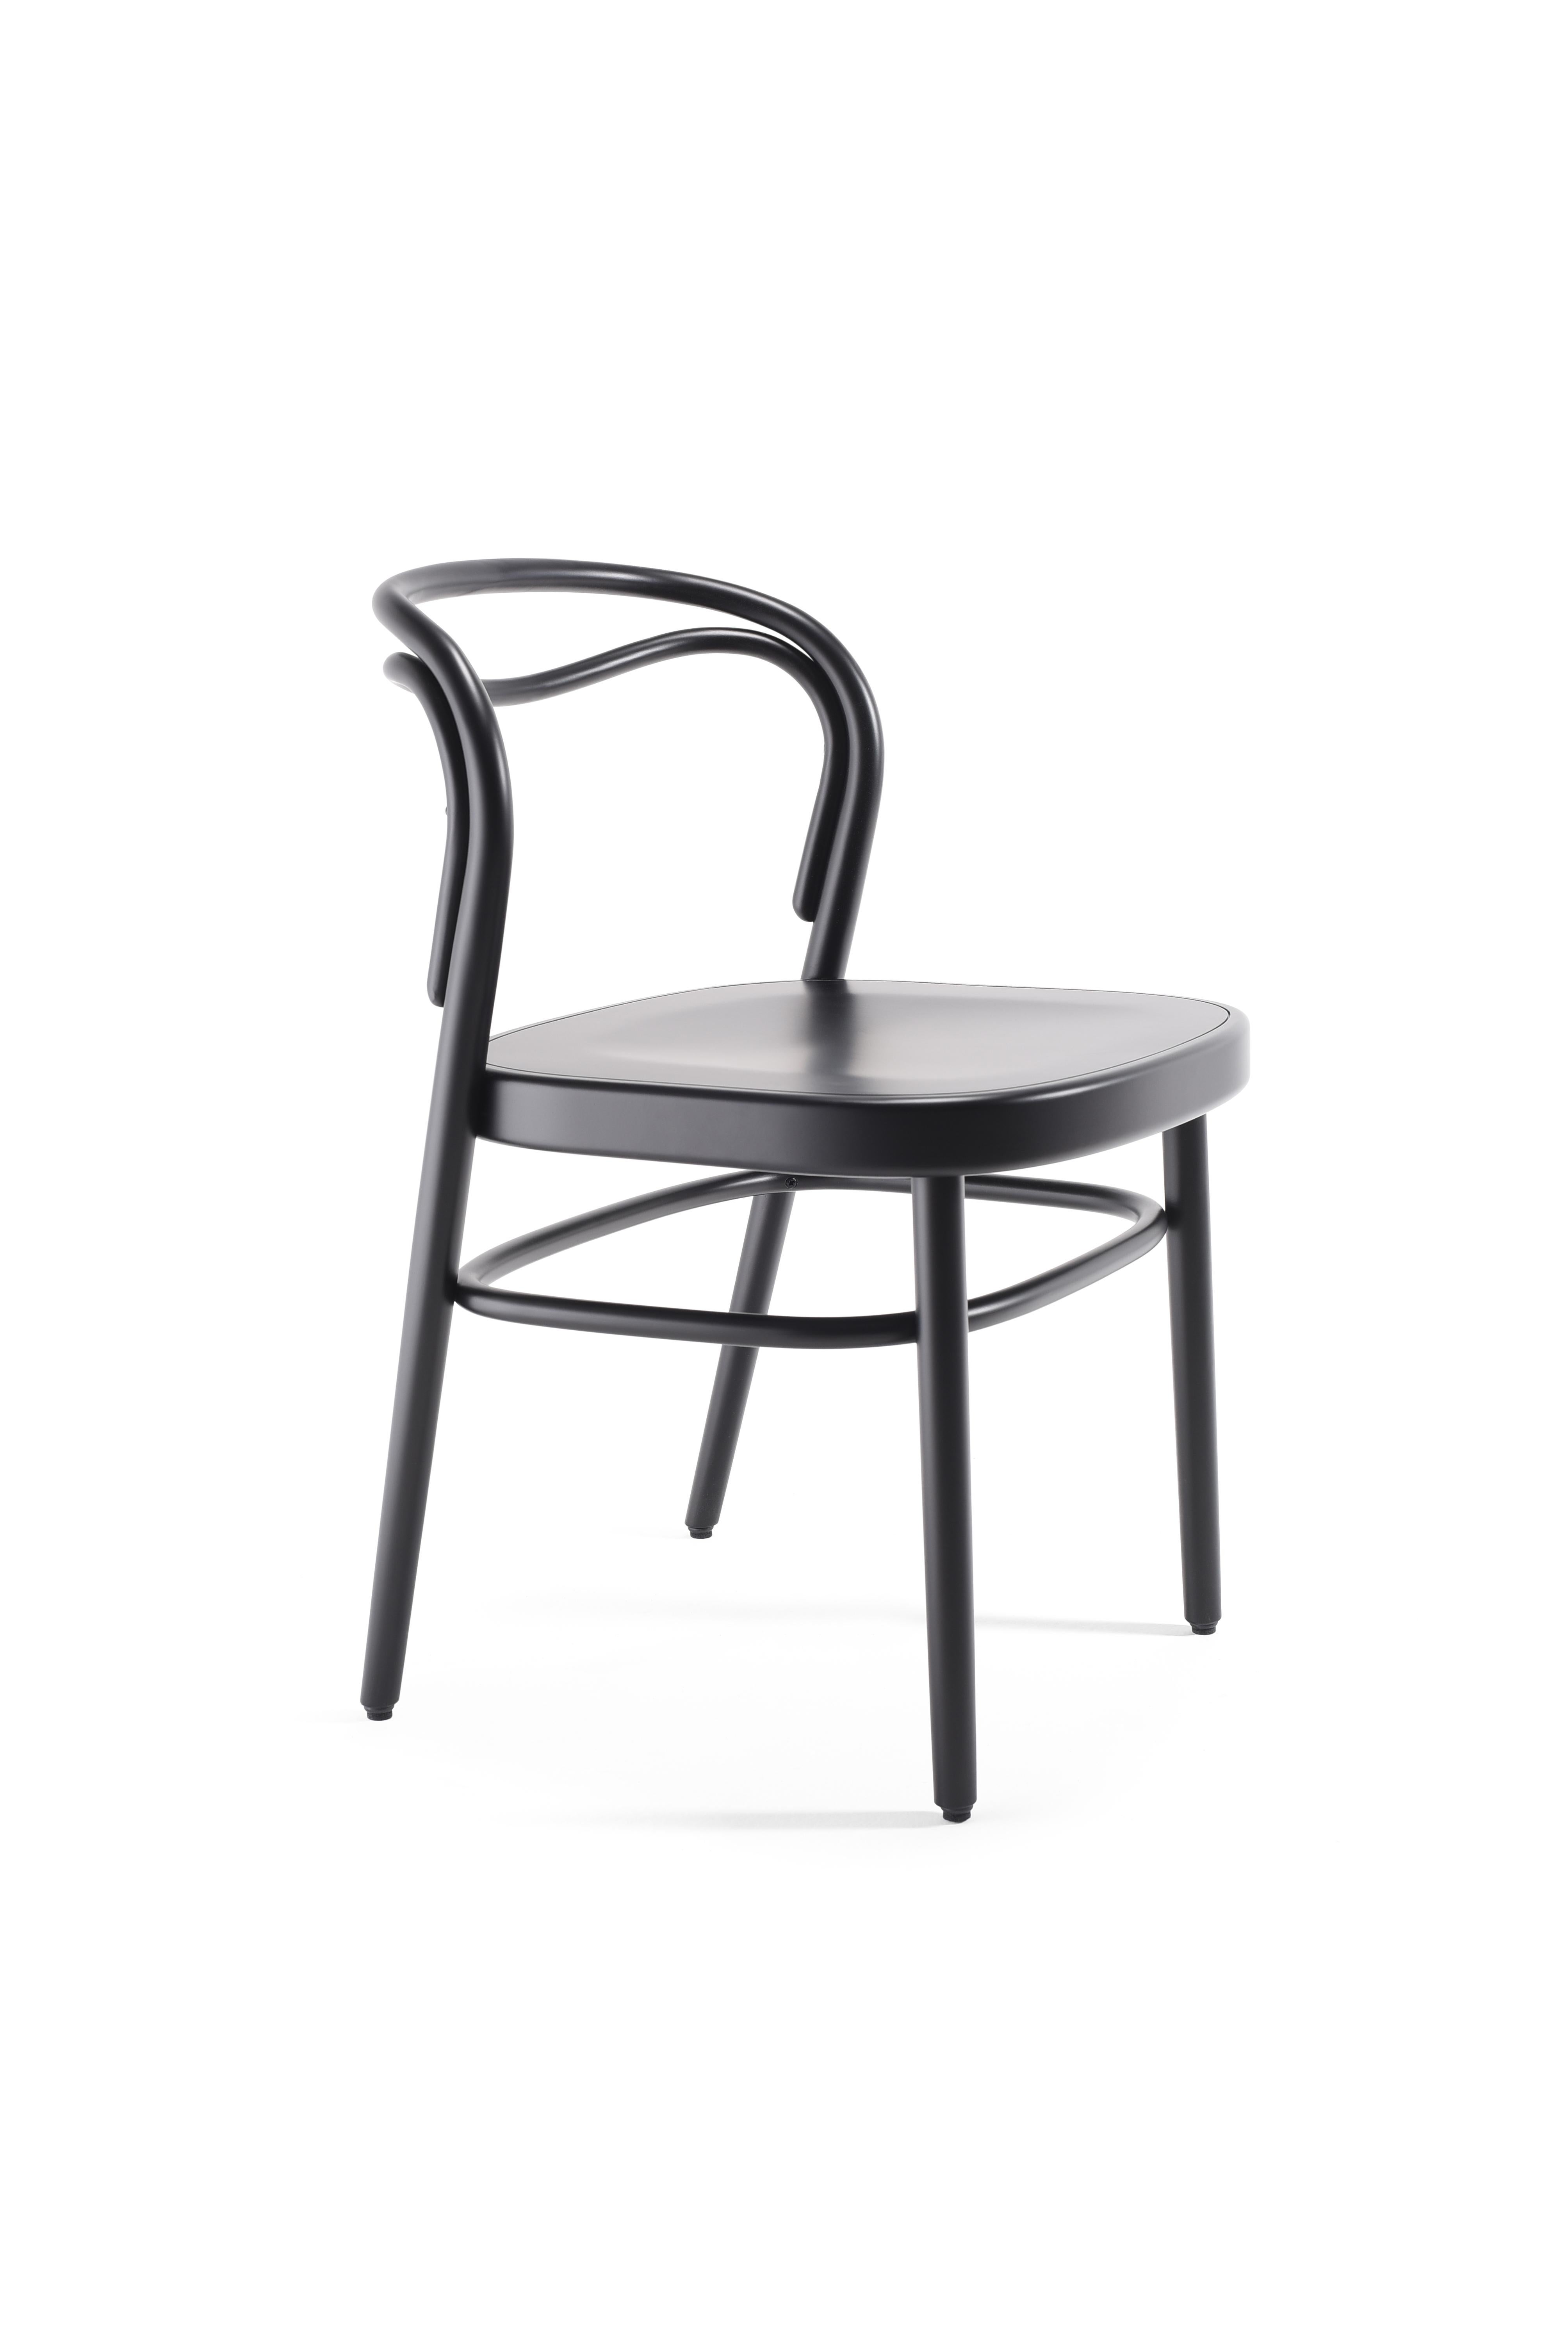 Gebrüder Thonet Vienna Beaulieu Chair with Plywood Seat by Philippe Nigro For Sale 1